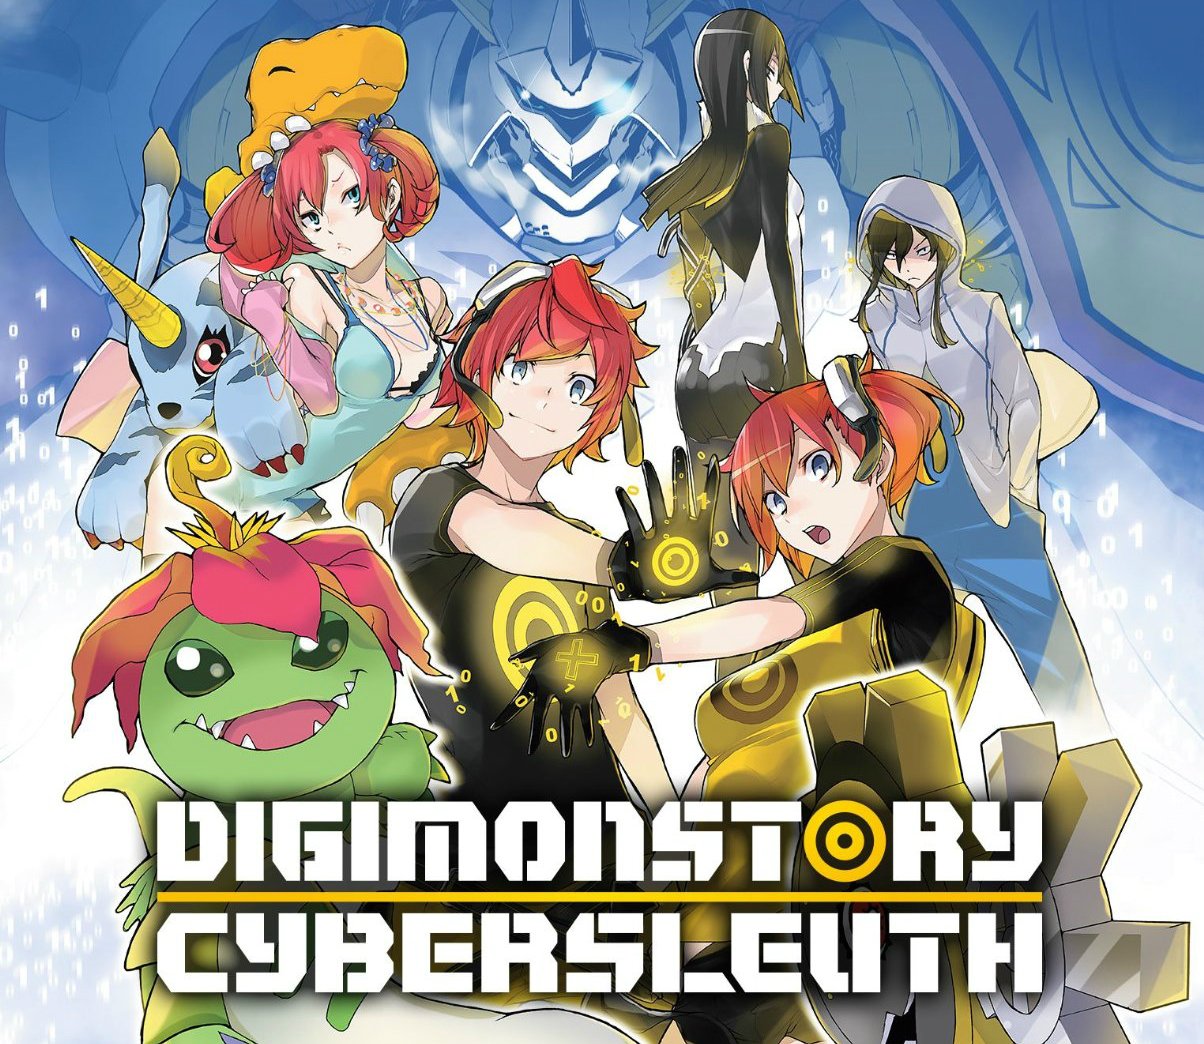 Image of Digimon Story Cyber Sleuth